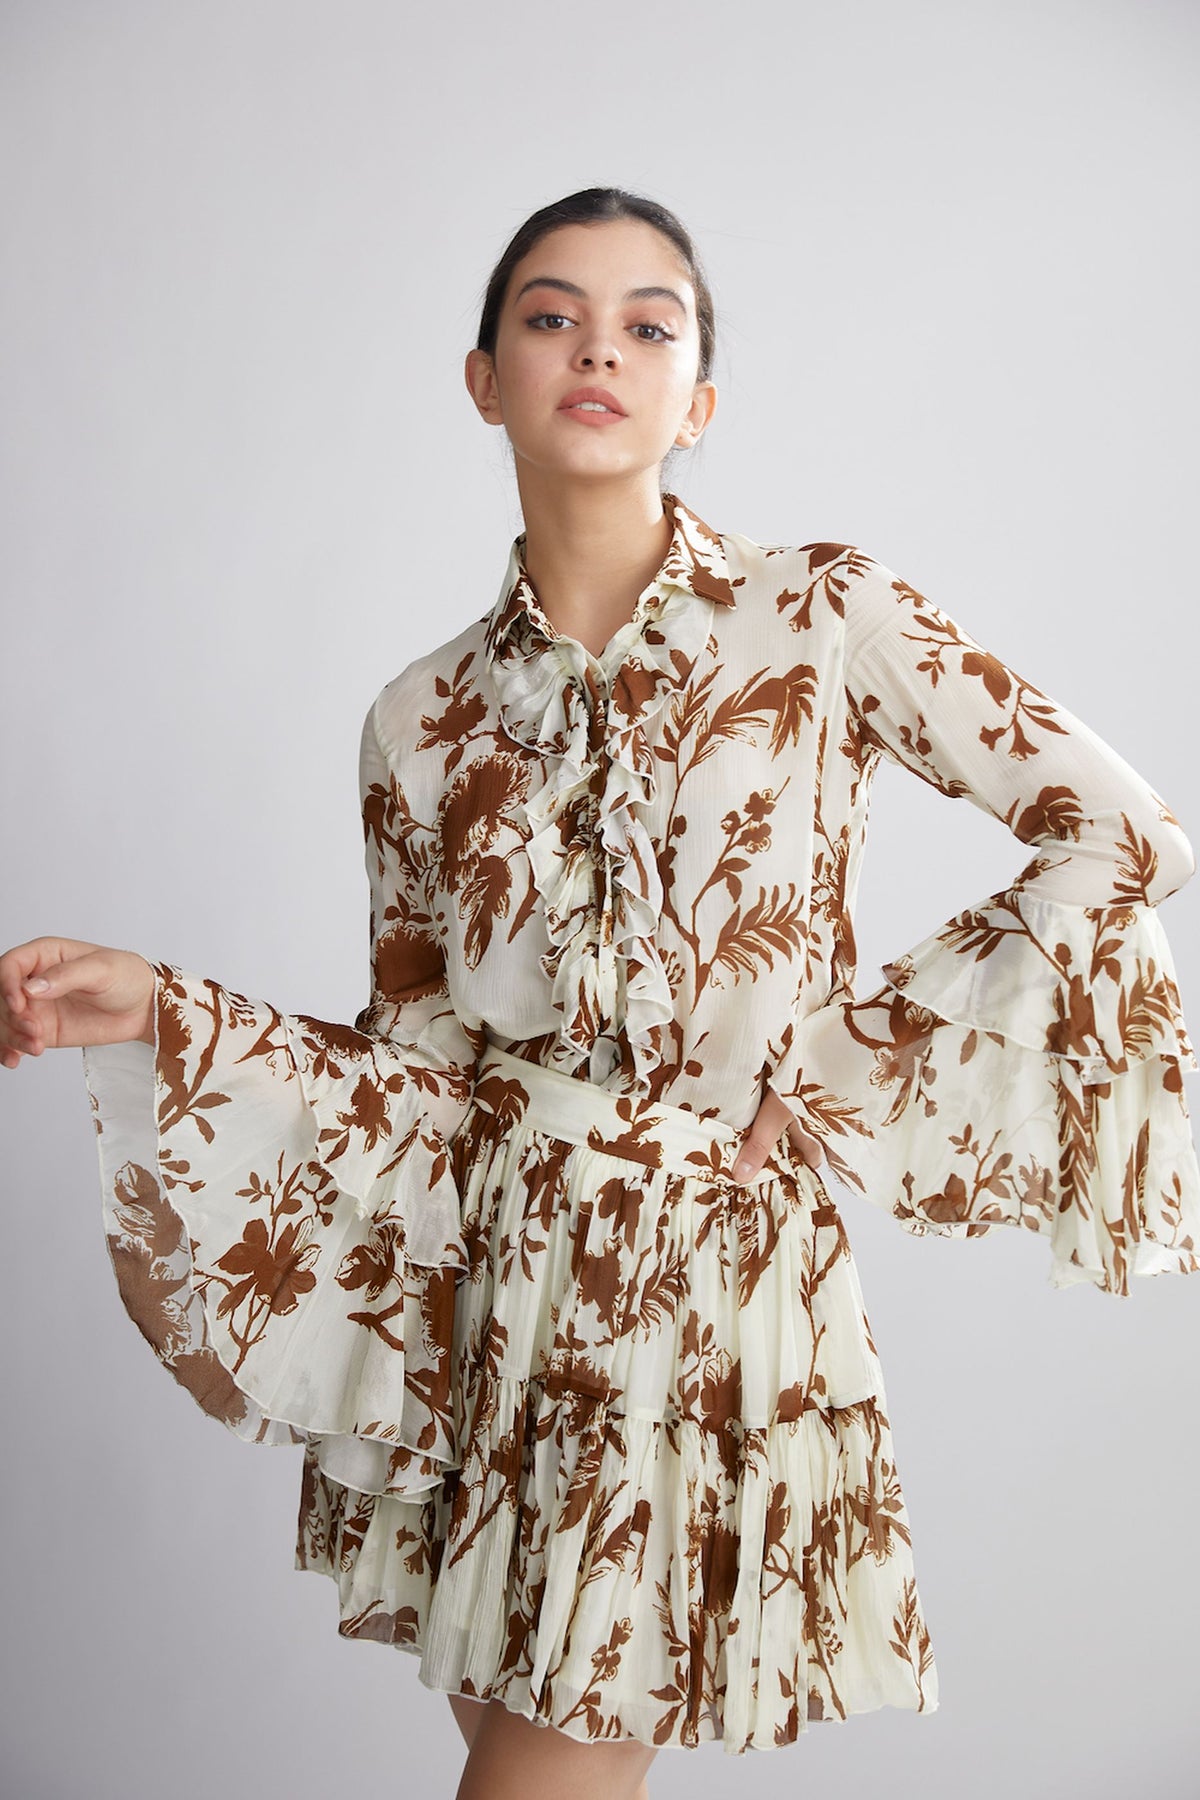 CREAM AND BROWN FLORAL FRILL TOP